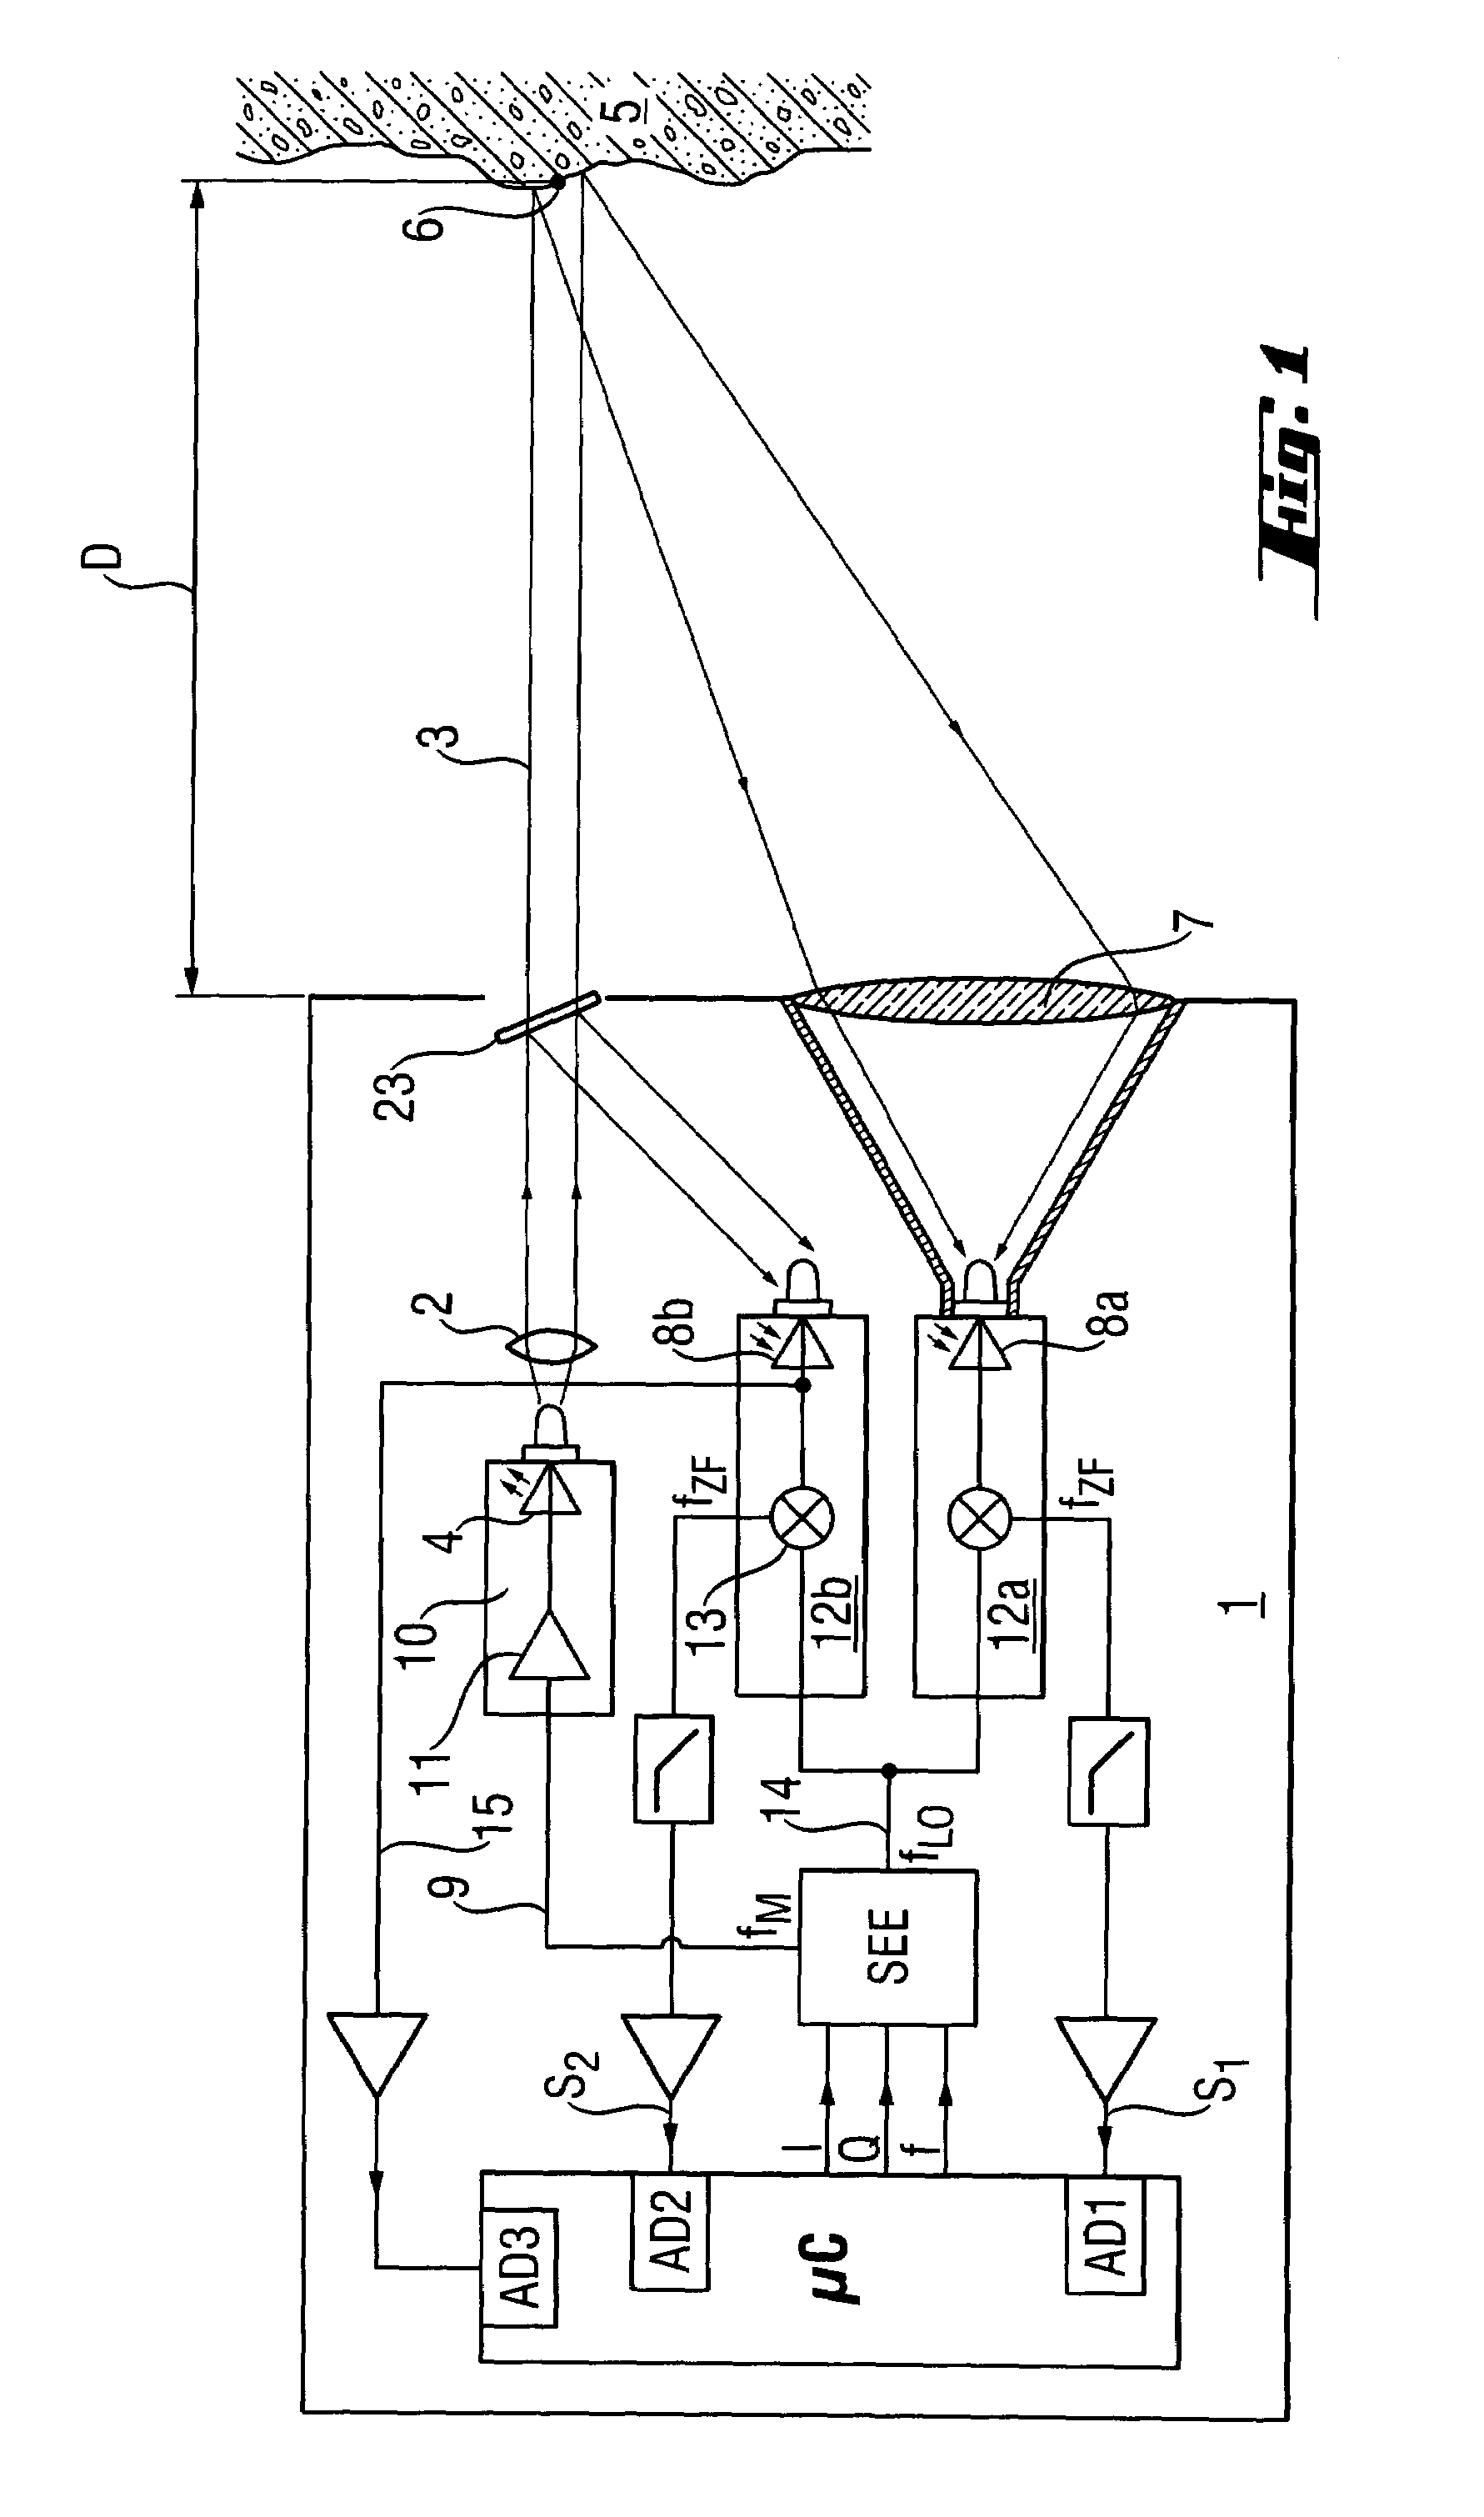 Laser distance measuring device with phase delay measurement